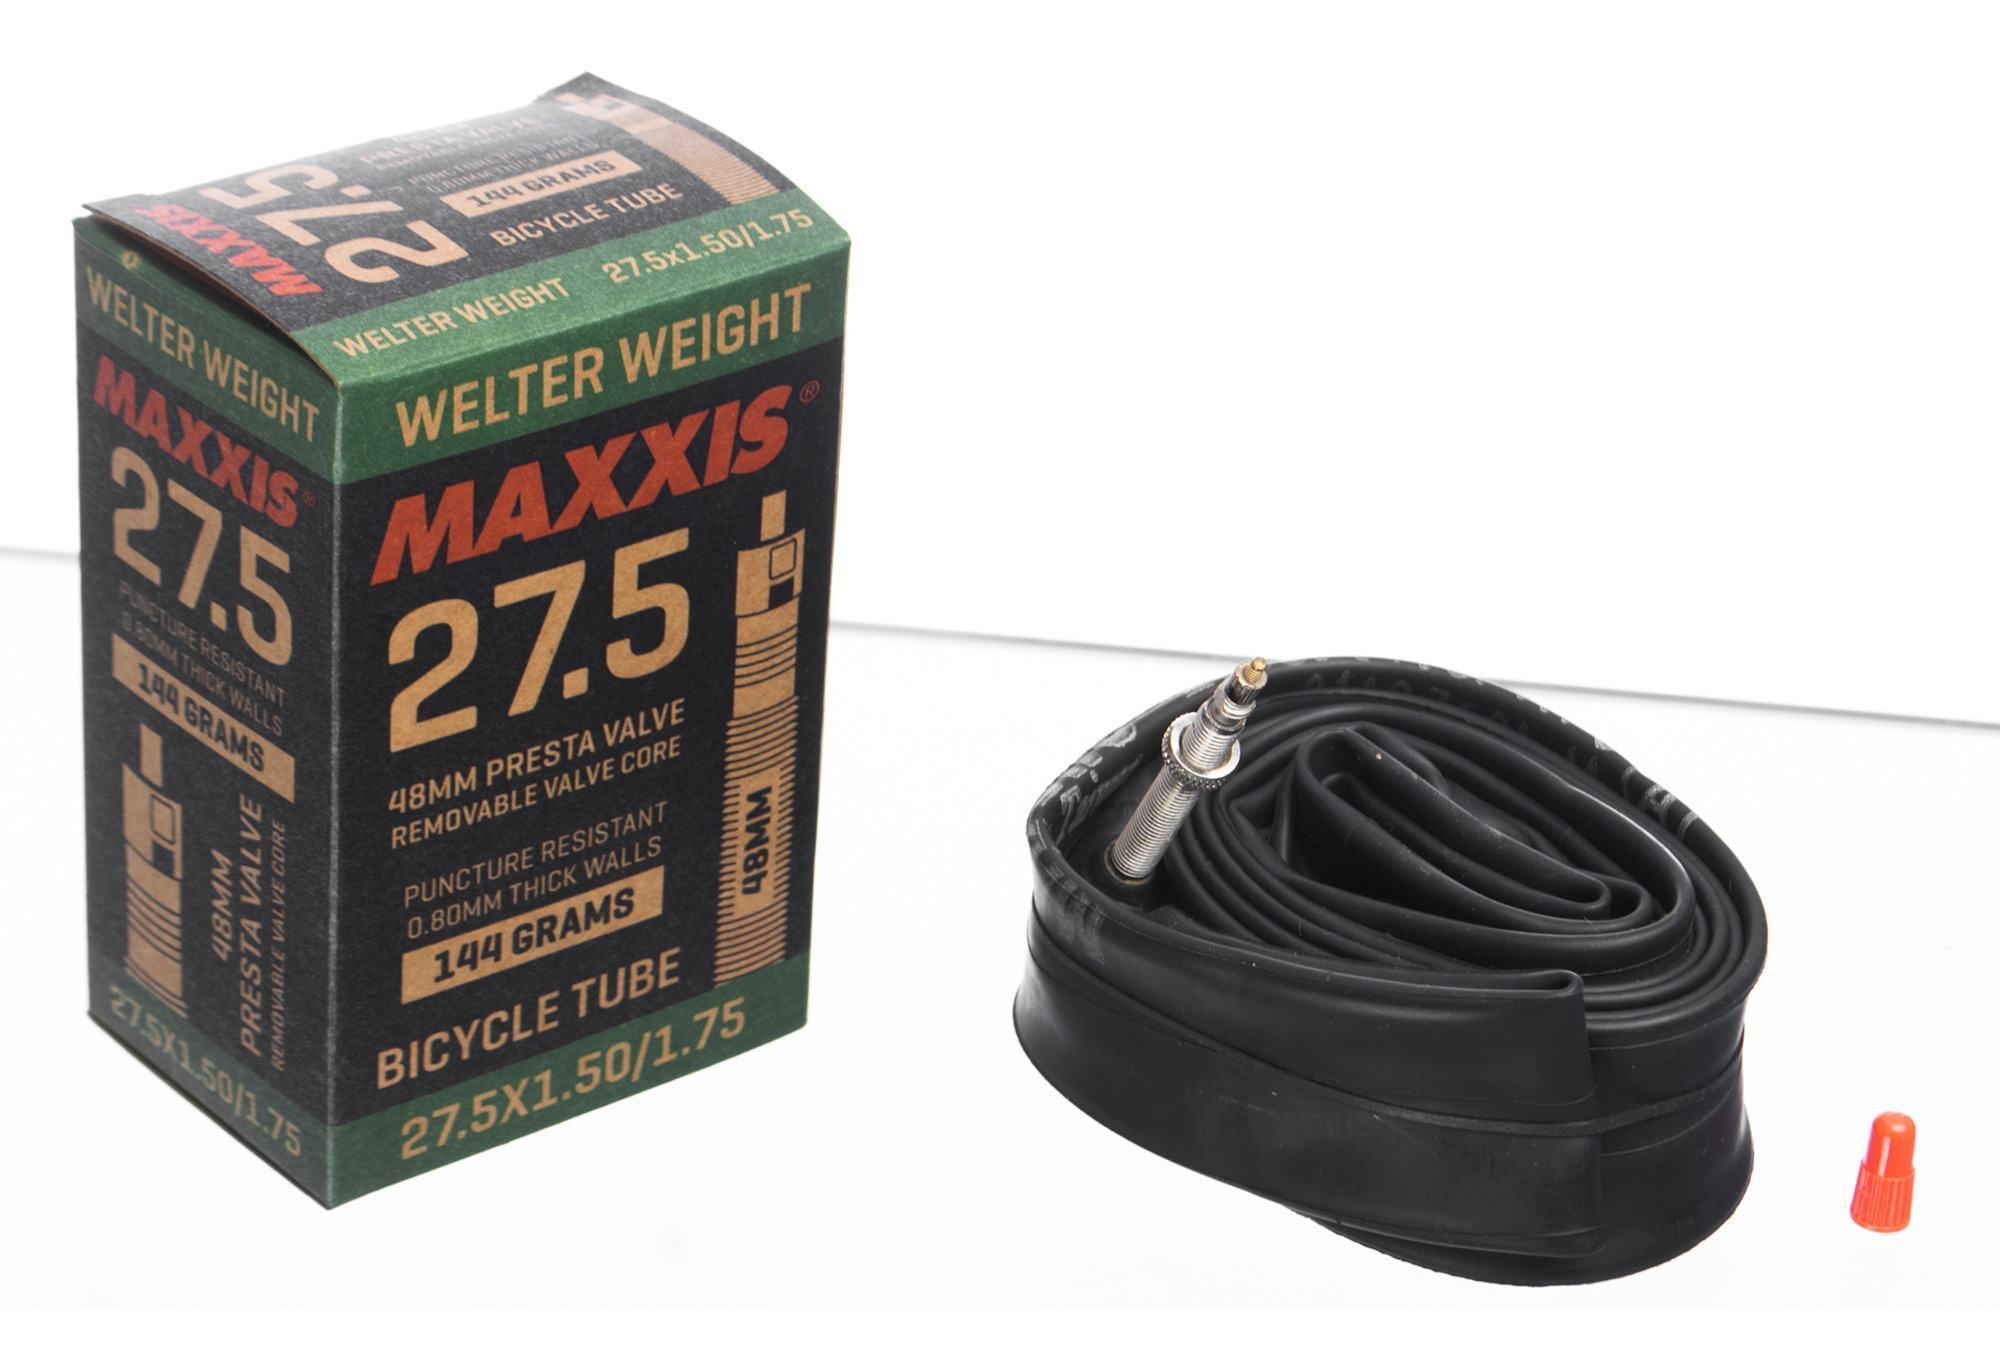 Камера Maxxis Welter Weight (IB75081400) 27.5x1.50/1.75 FV L:48мм